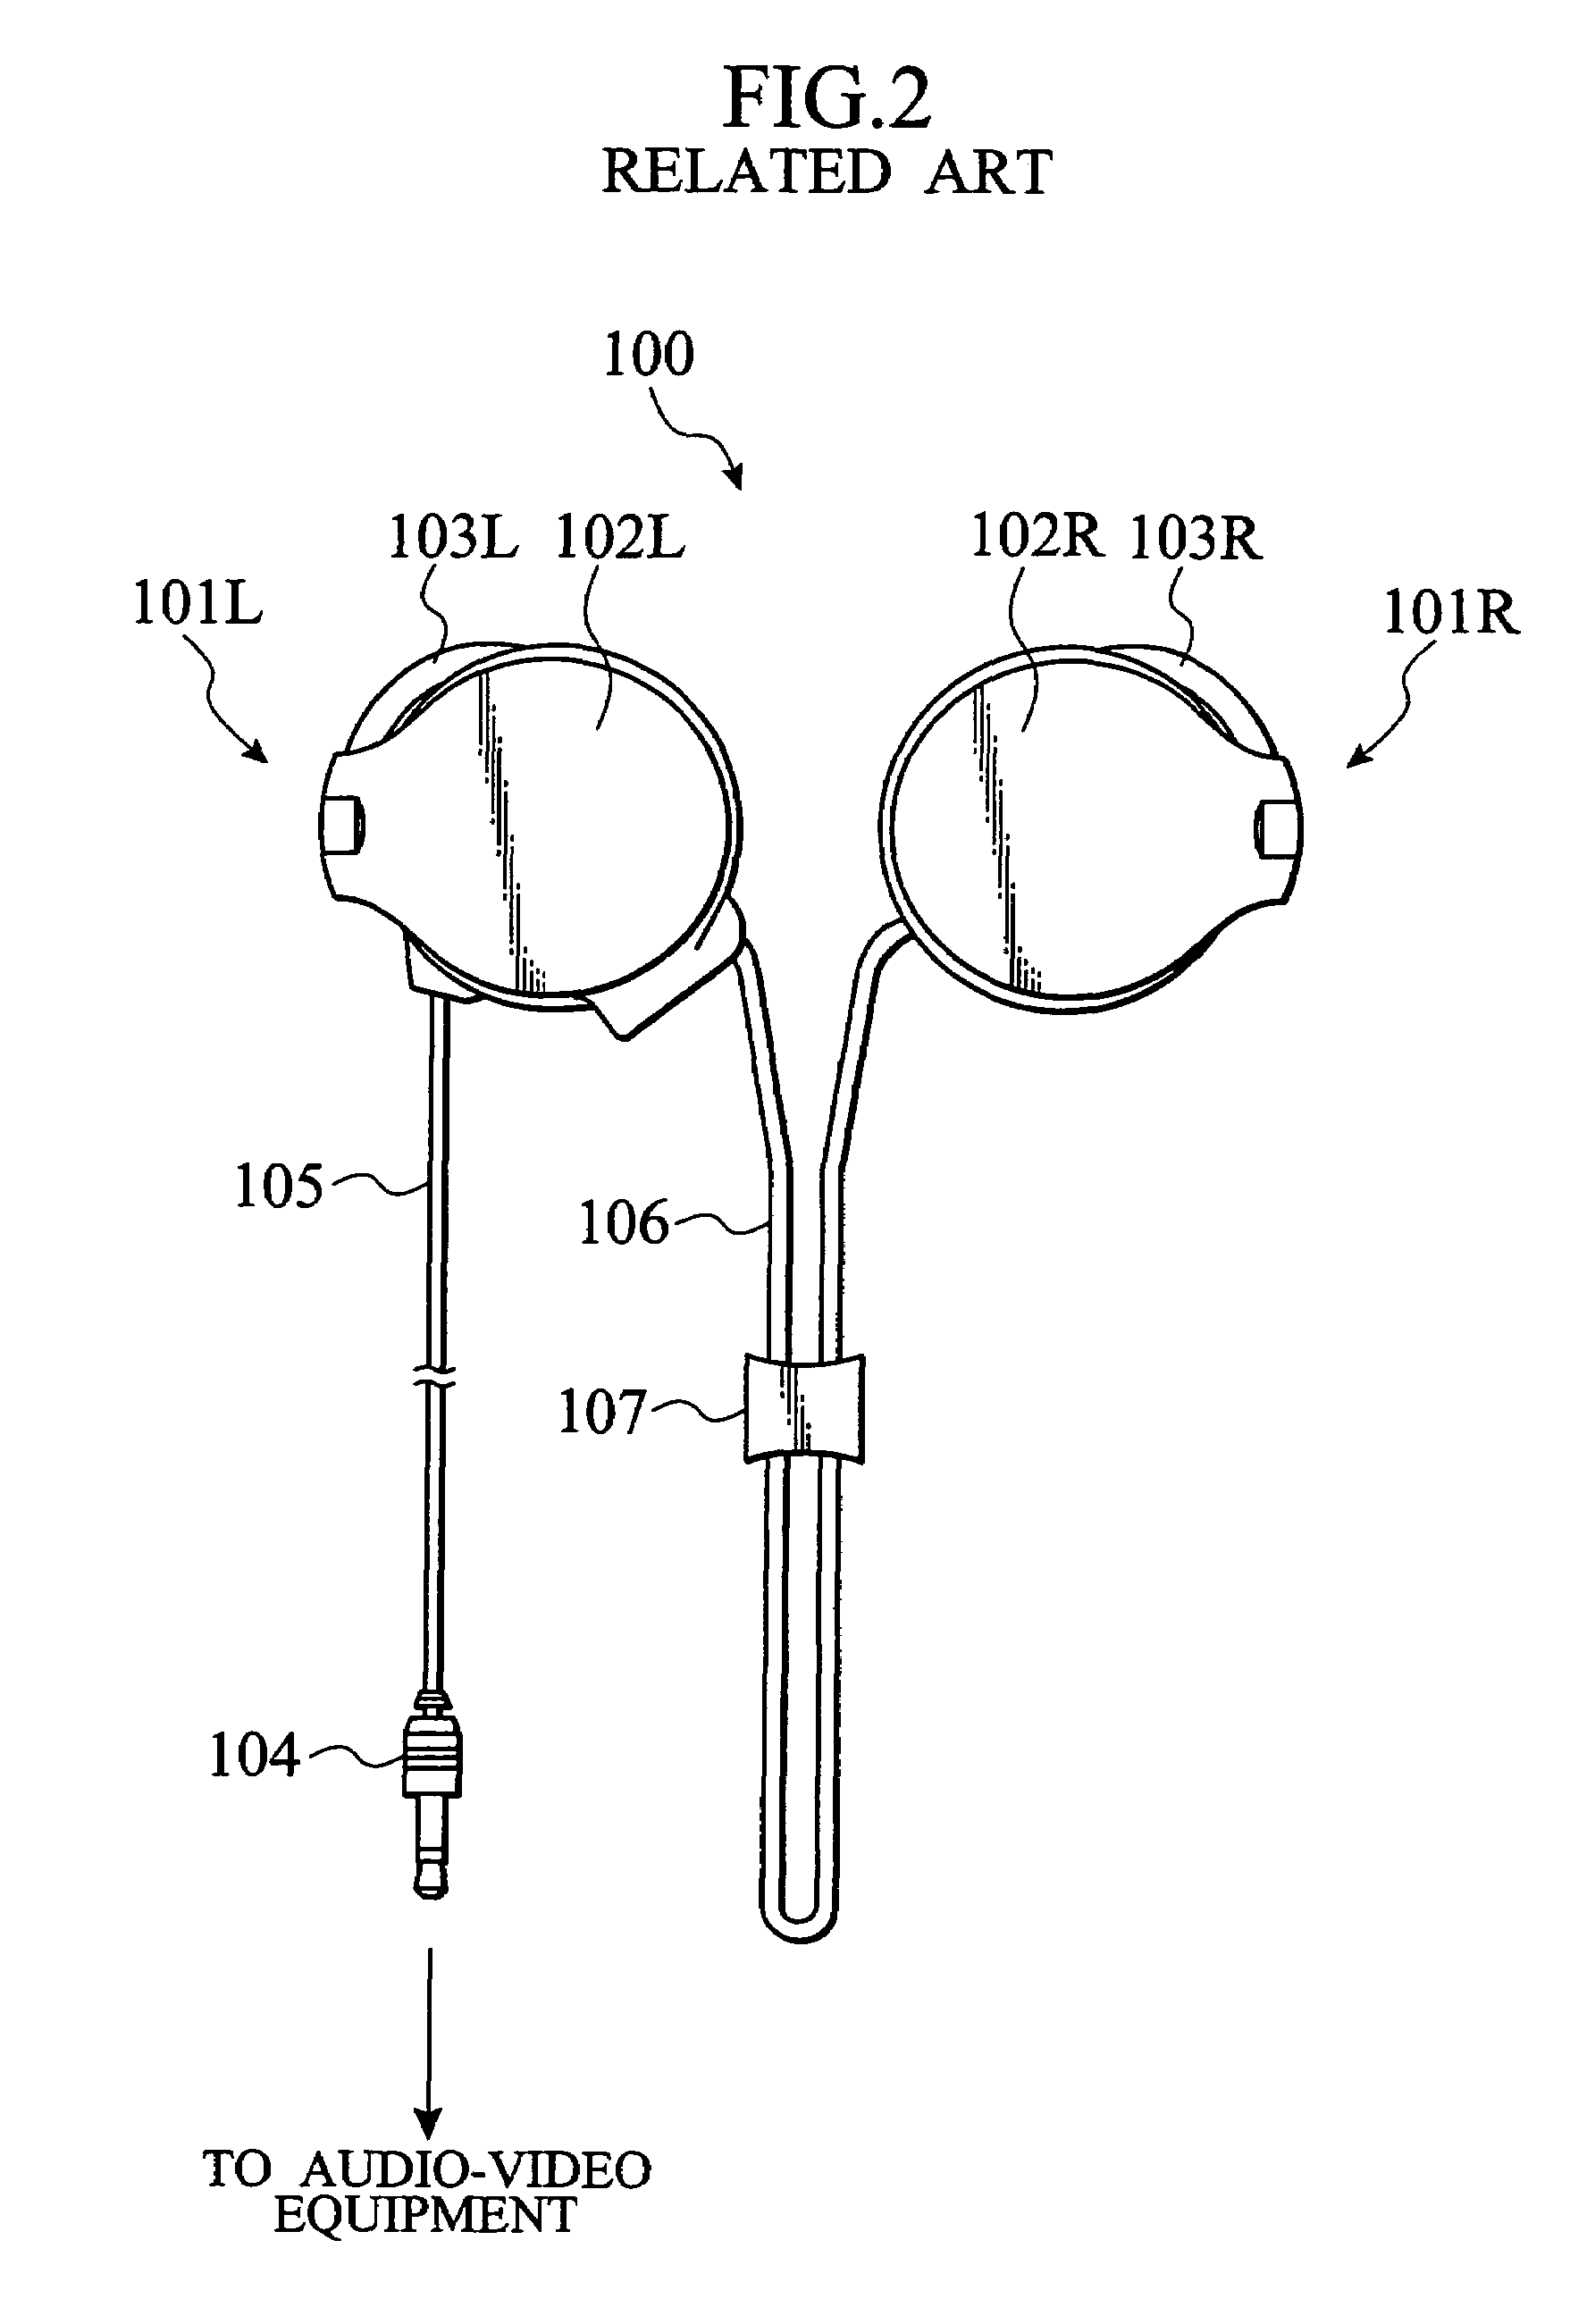 Headphone with cord winder devices